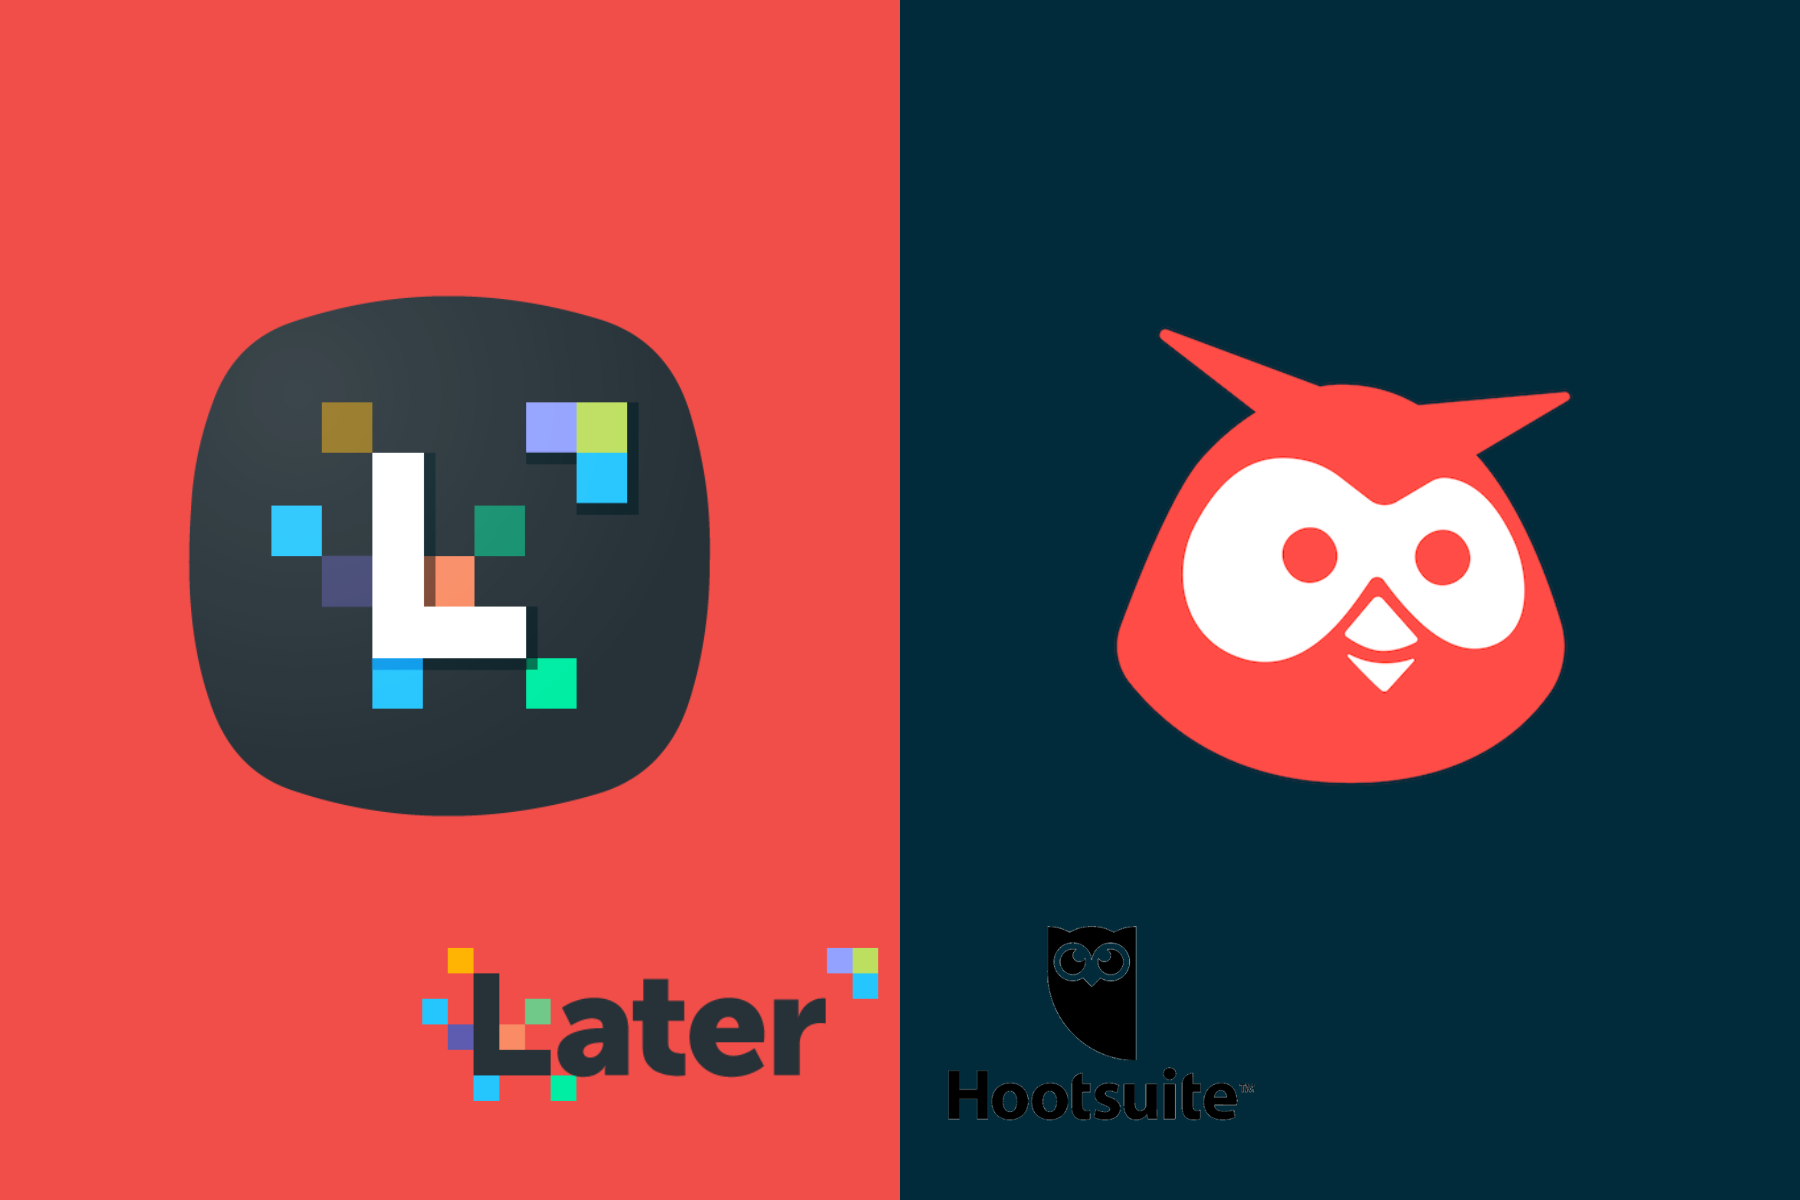 The logo of Later app on the left and Hootsuite app on the right